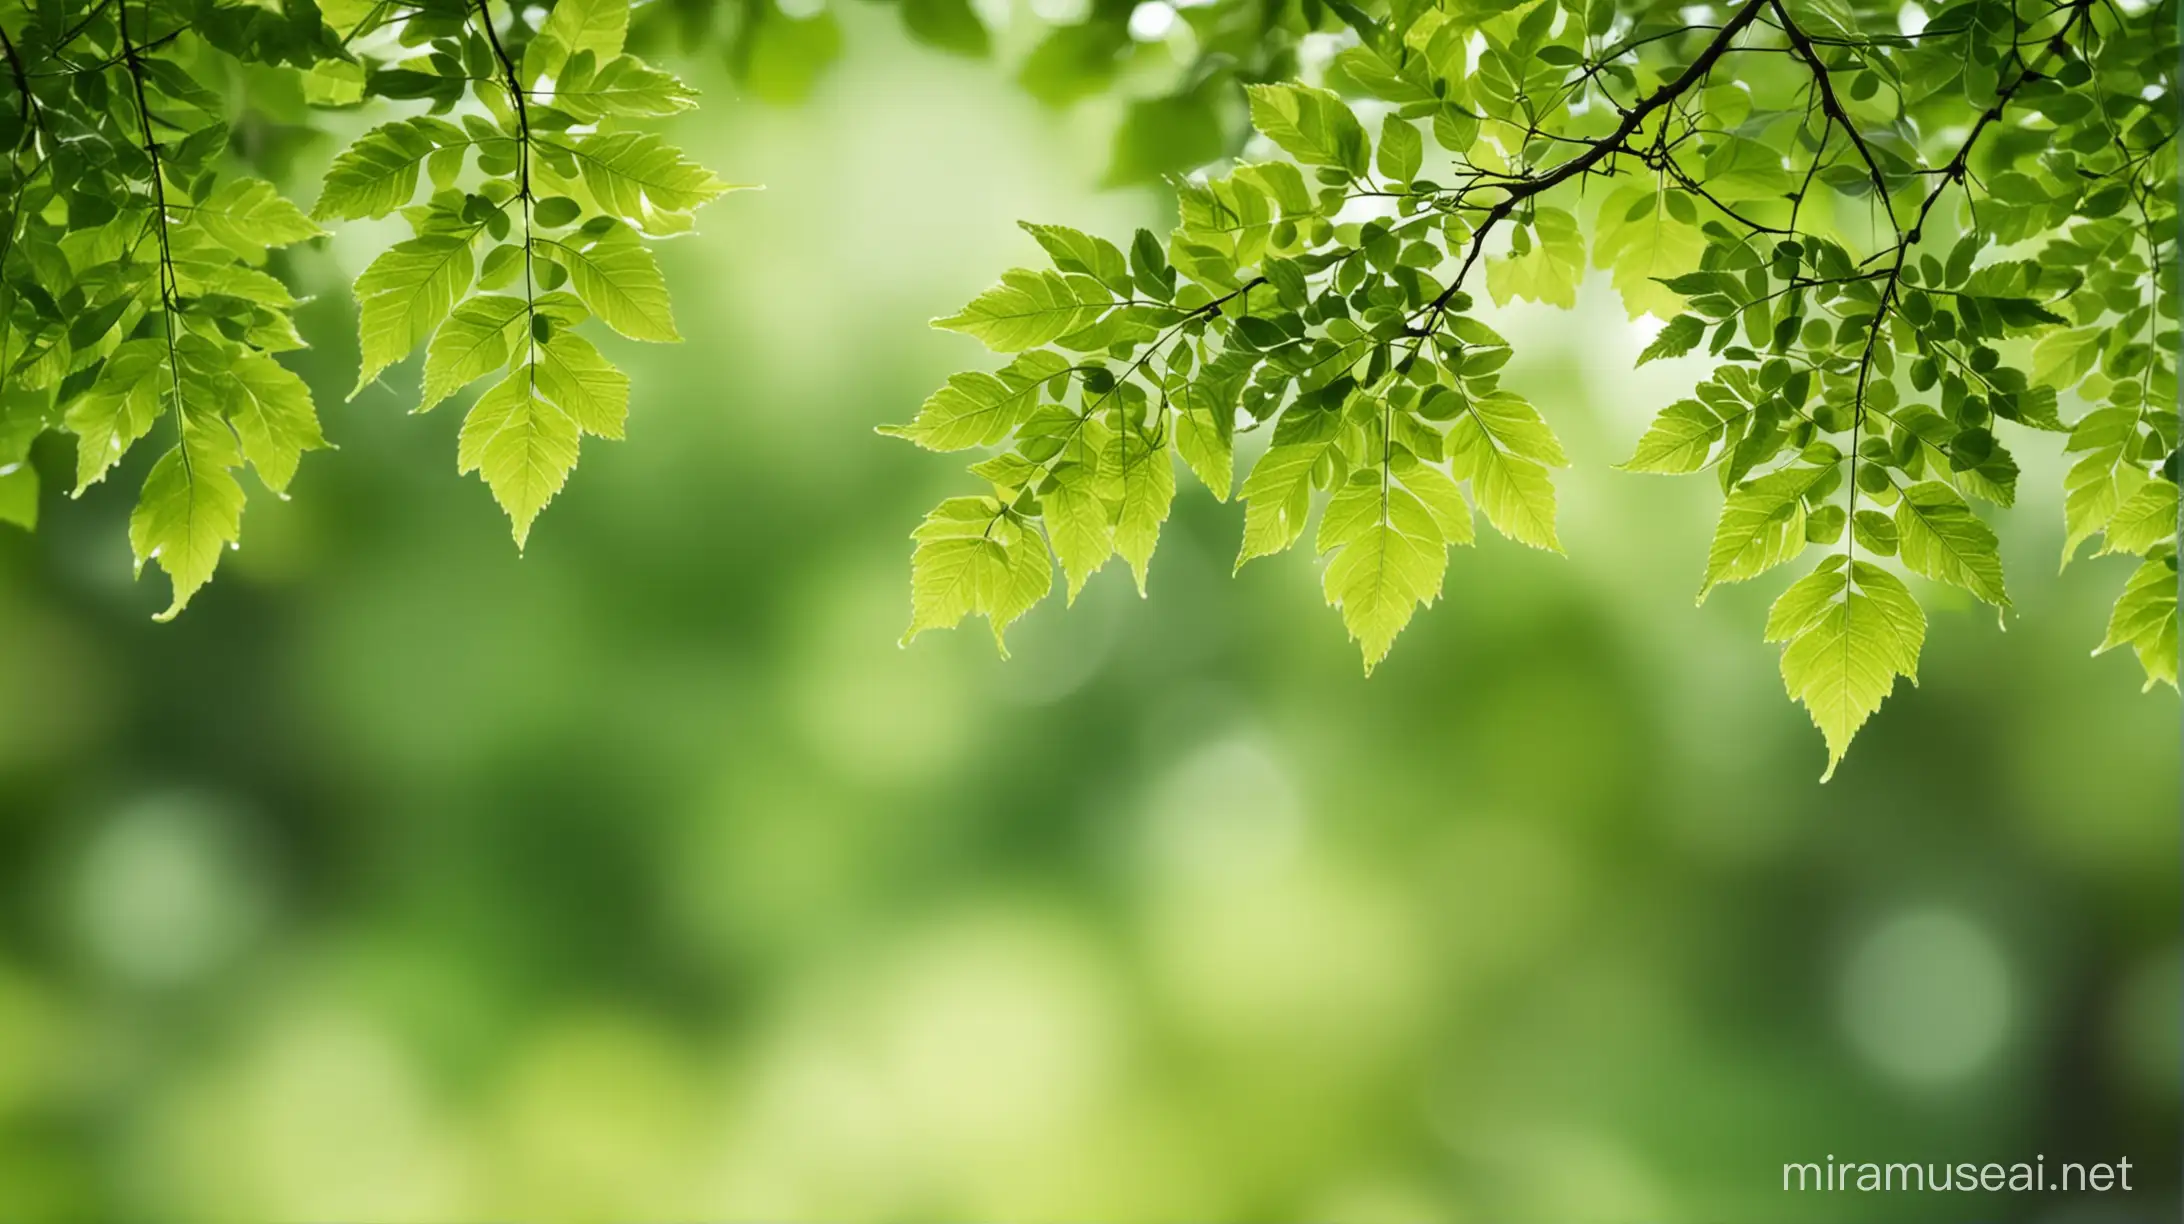 Green Bokeh with Blurred Nature Background